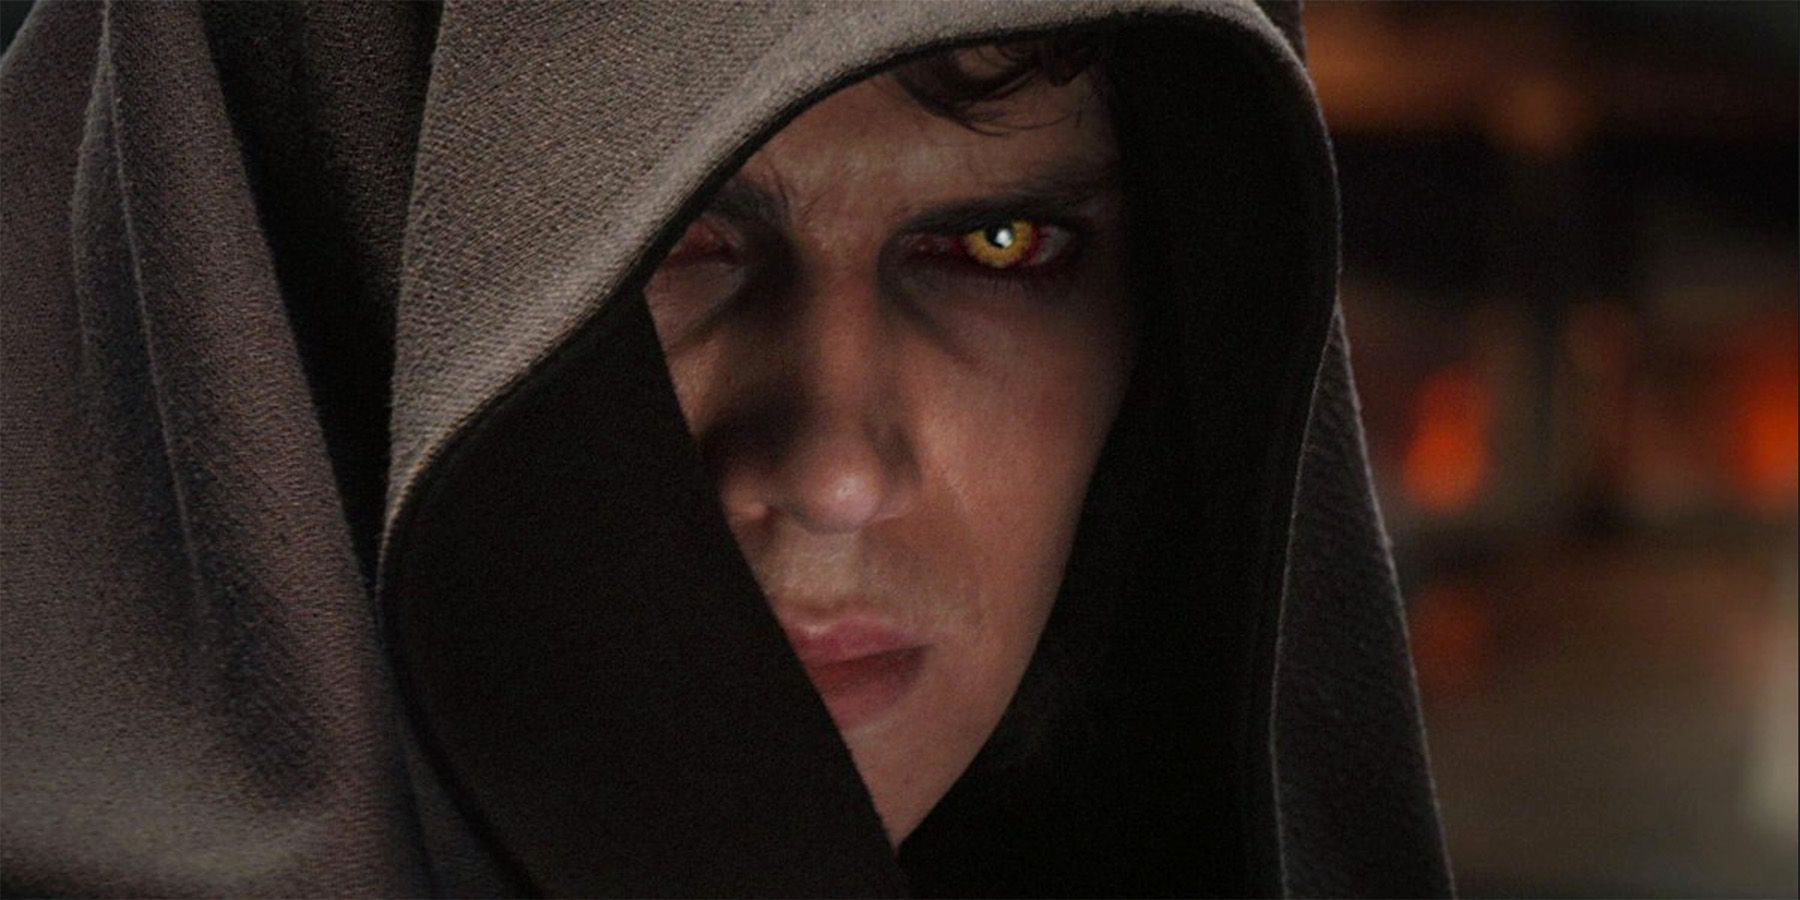 Anakin Skywalker with Sith yellow eyes in Revenge of the Sith